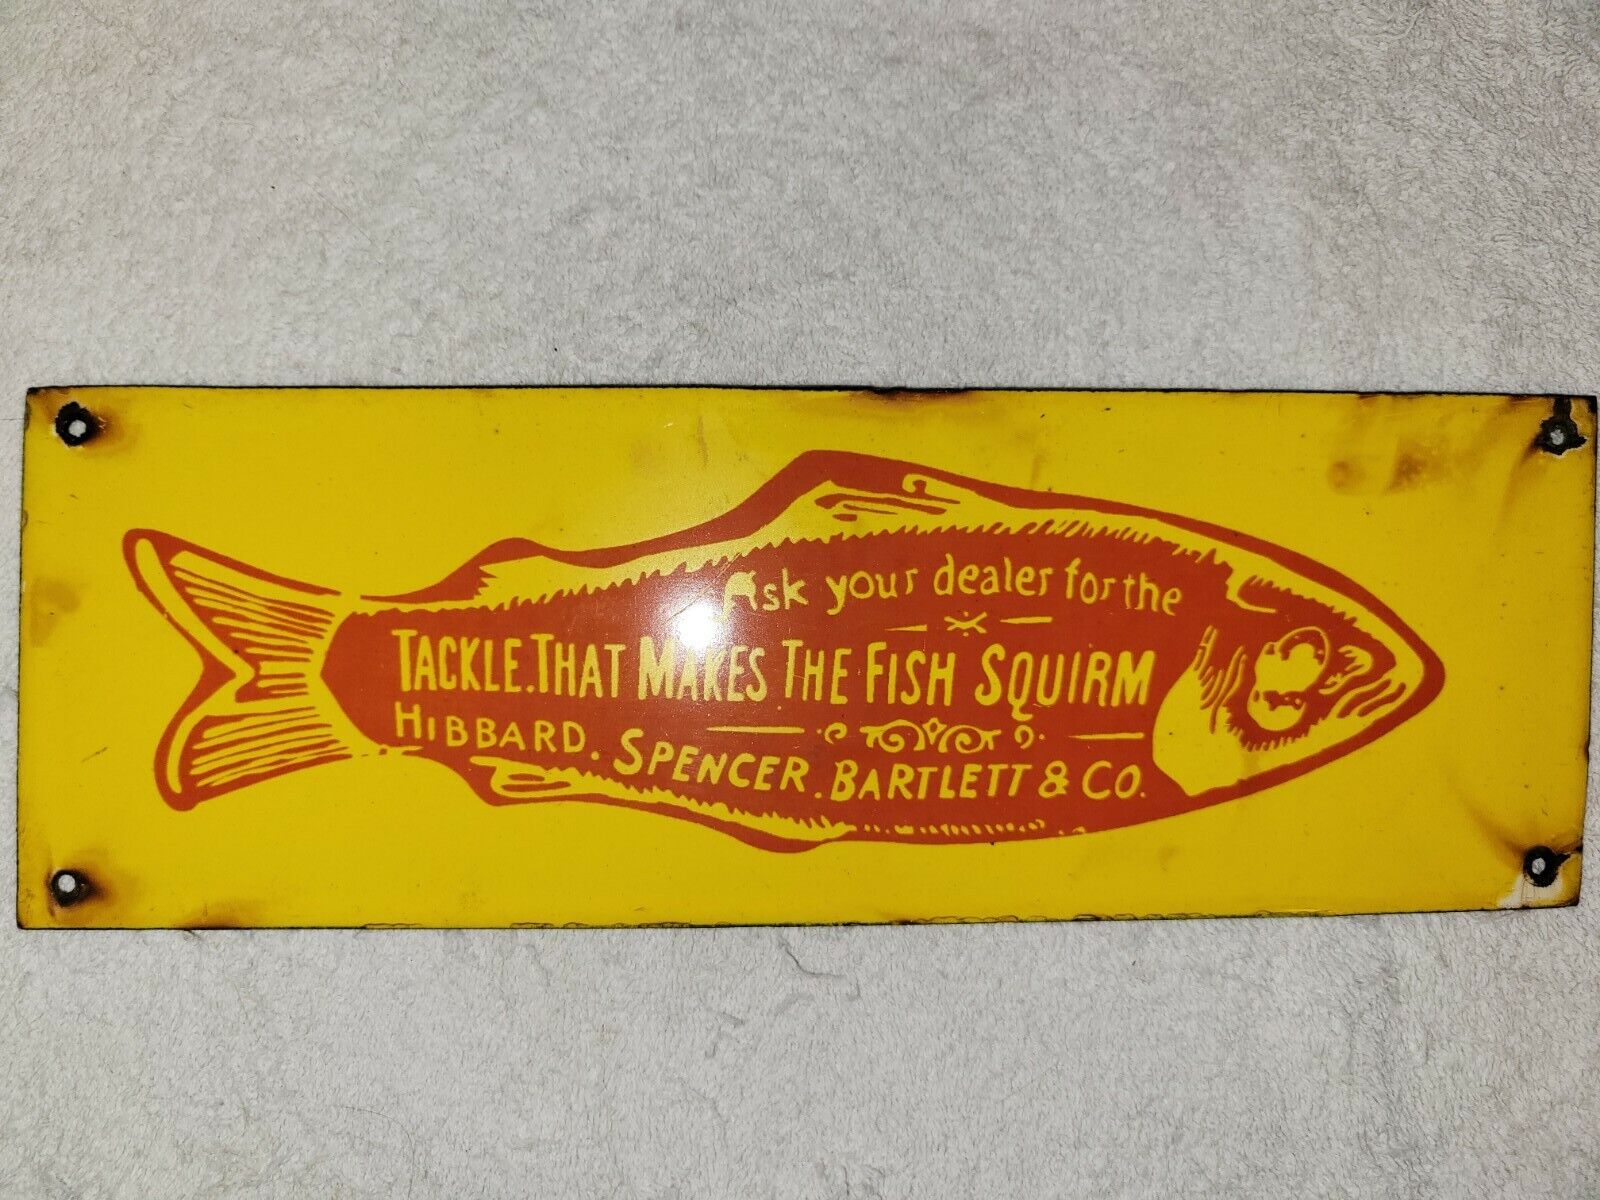 VINTAGE TACKLE. THAT MAKES THE FISH SQUIRM FISHING LAKE CAMPING RV 